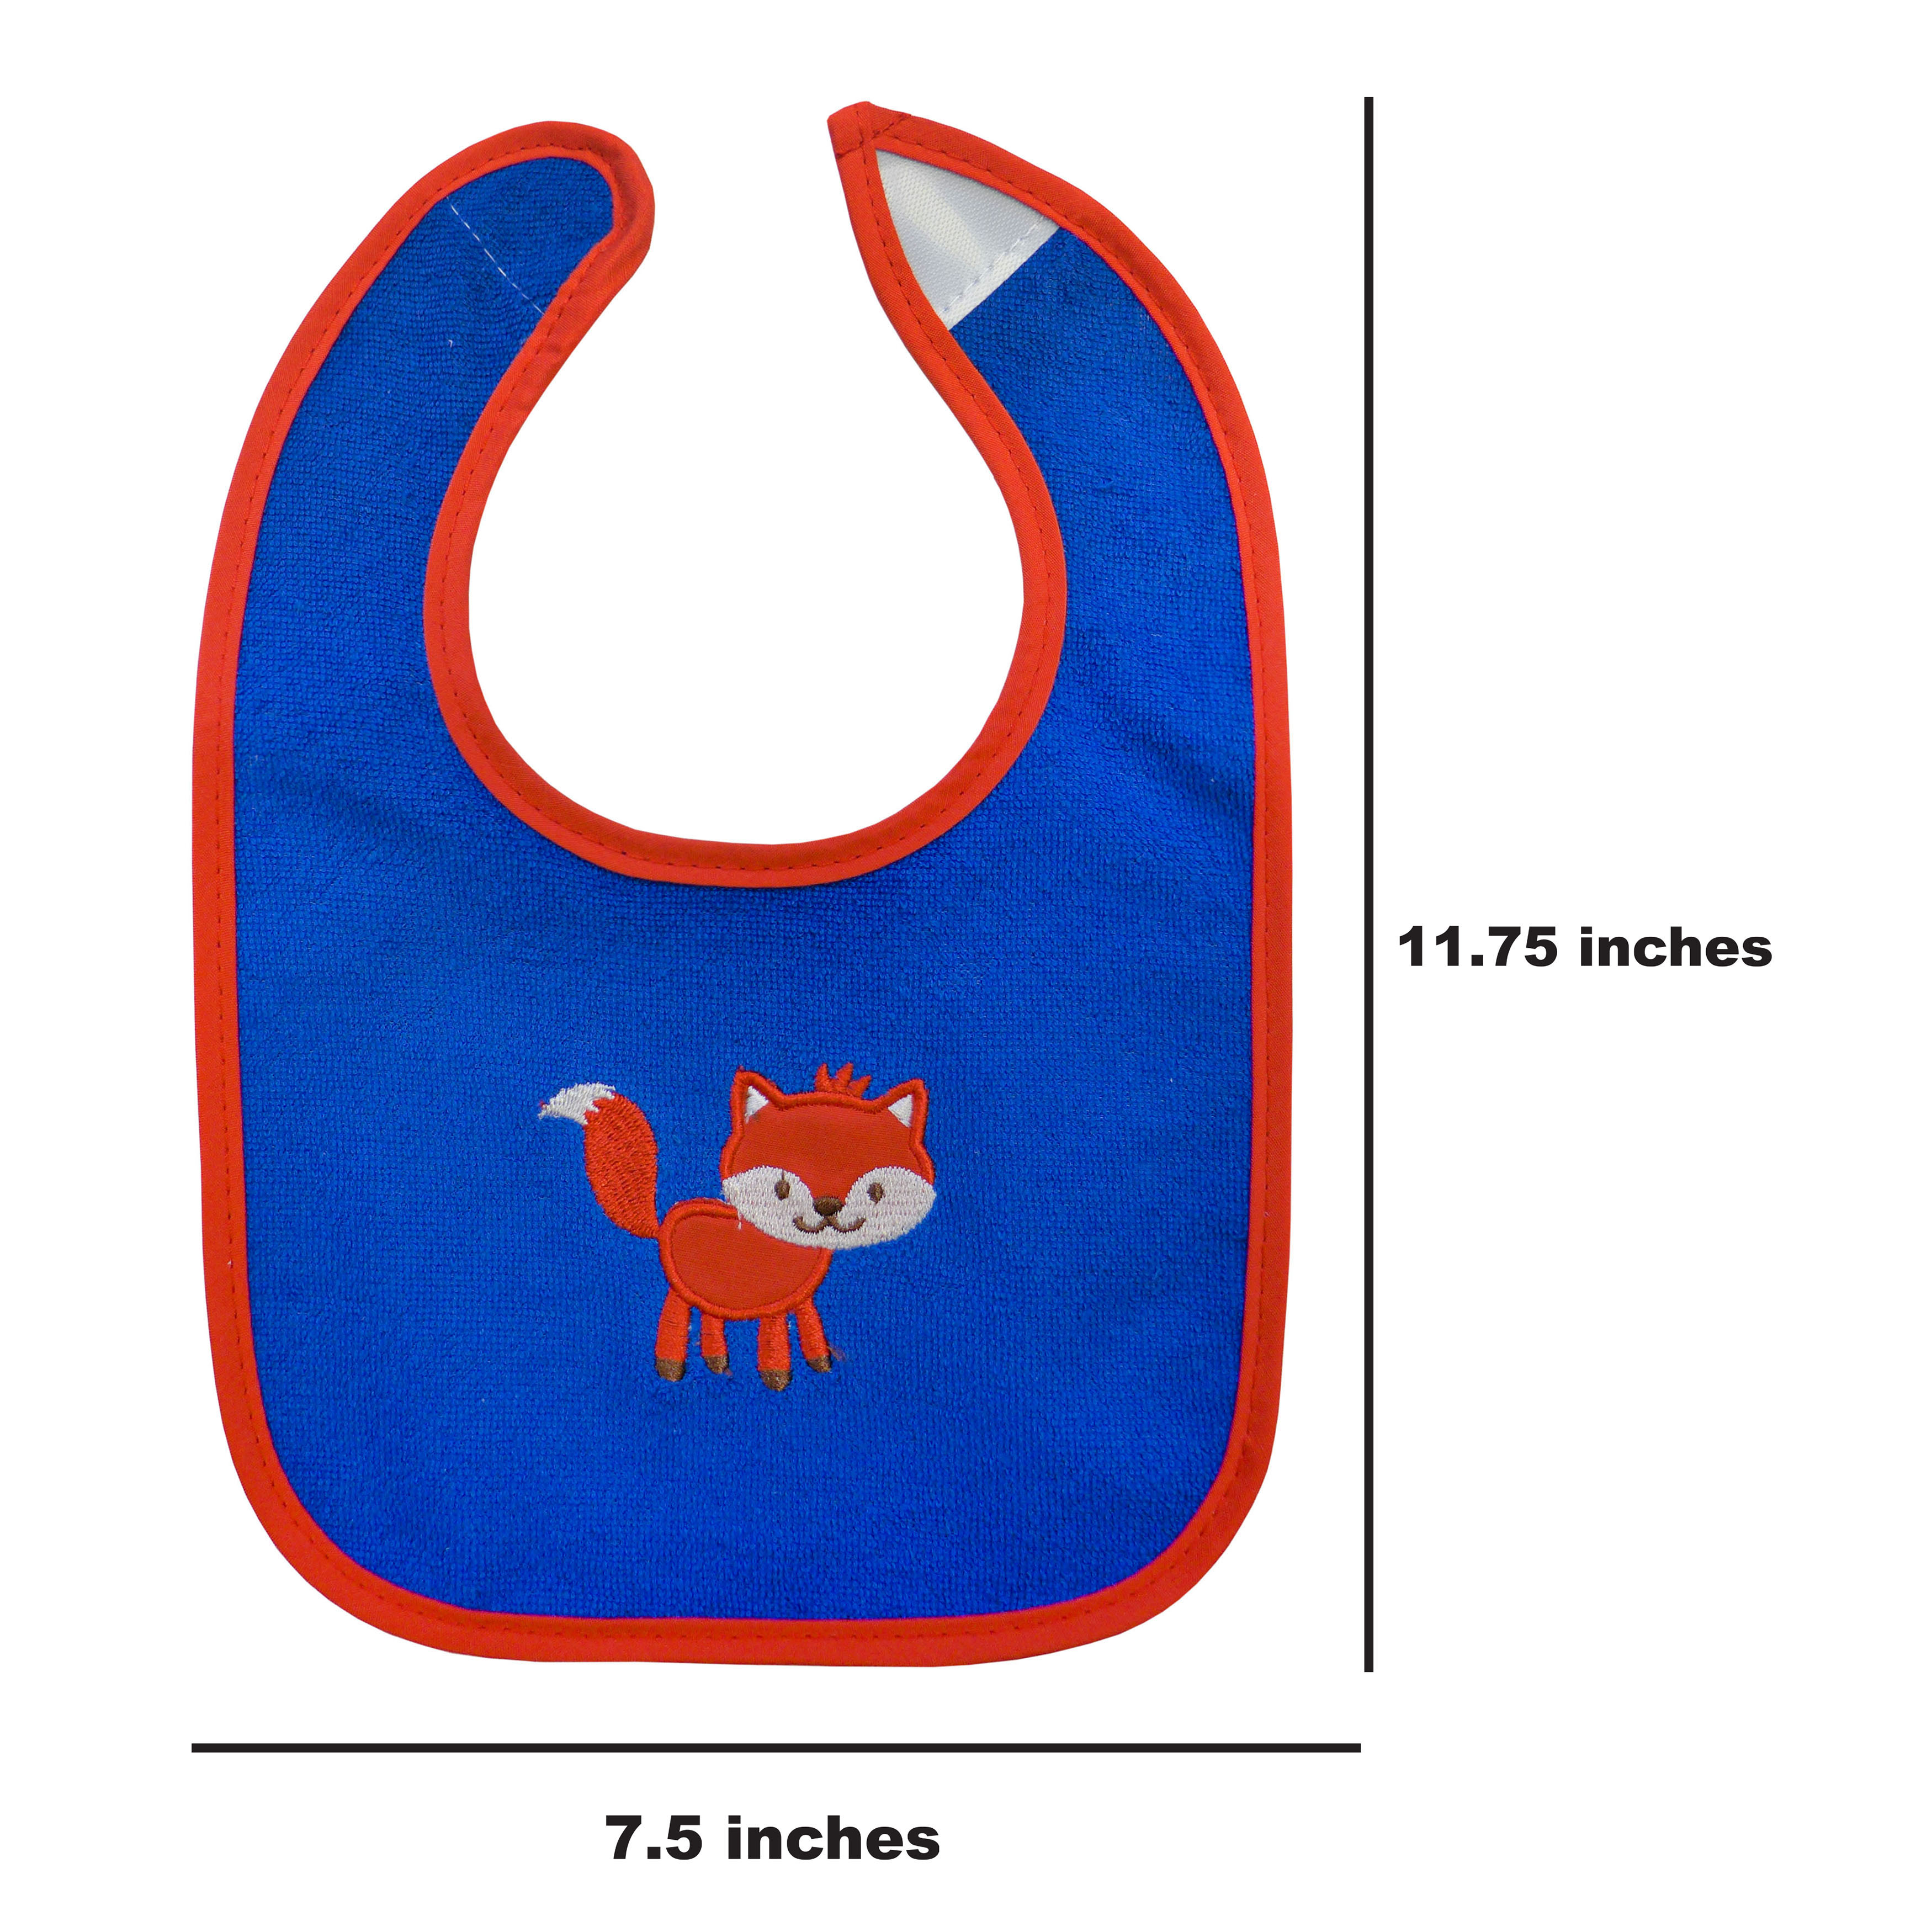 Neat Solutions Cotton and Polyester Baby Bib, 10pk Boys - image 4 of 12